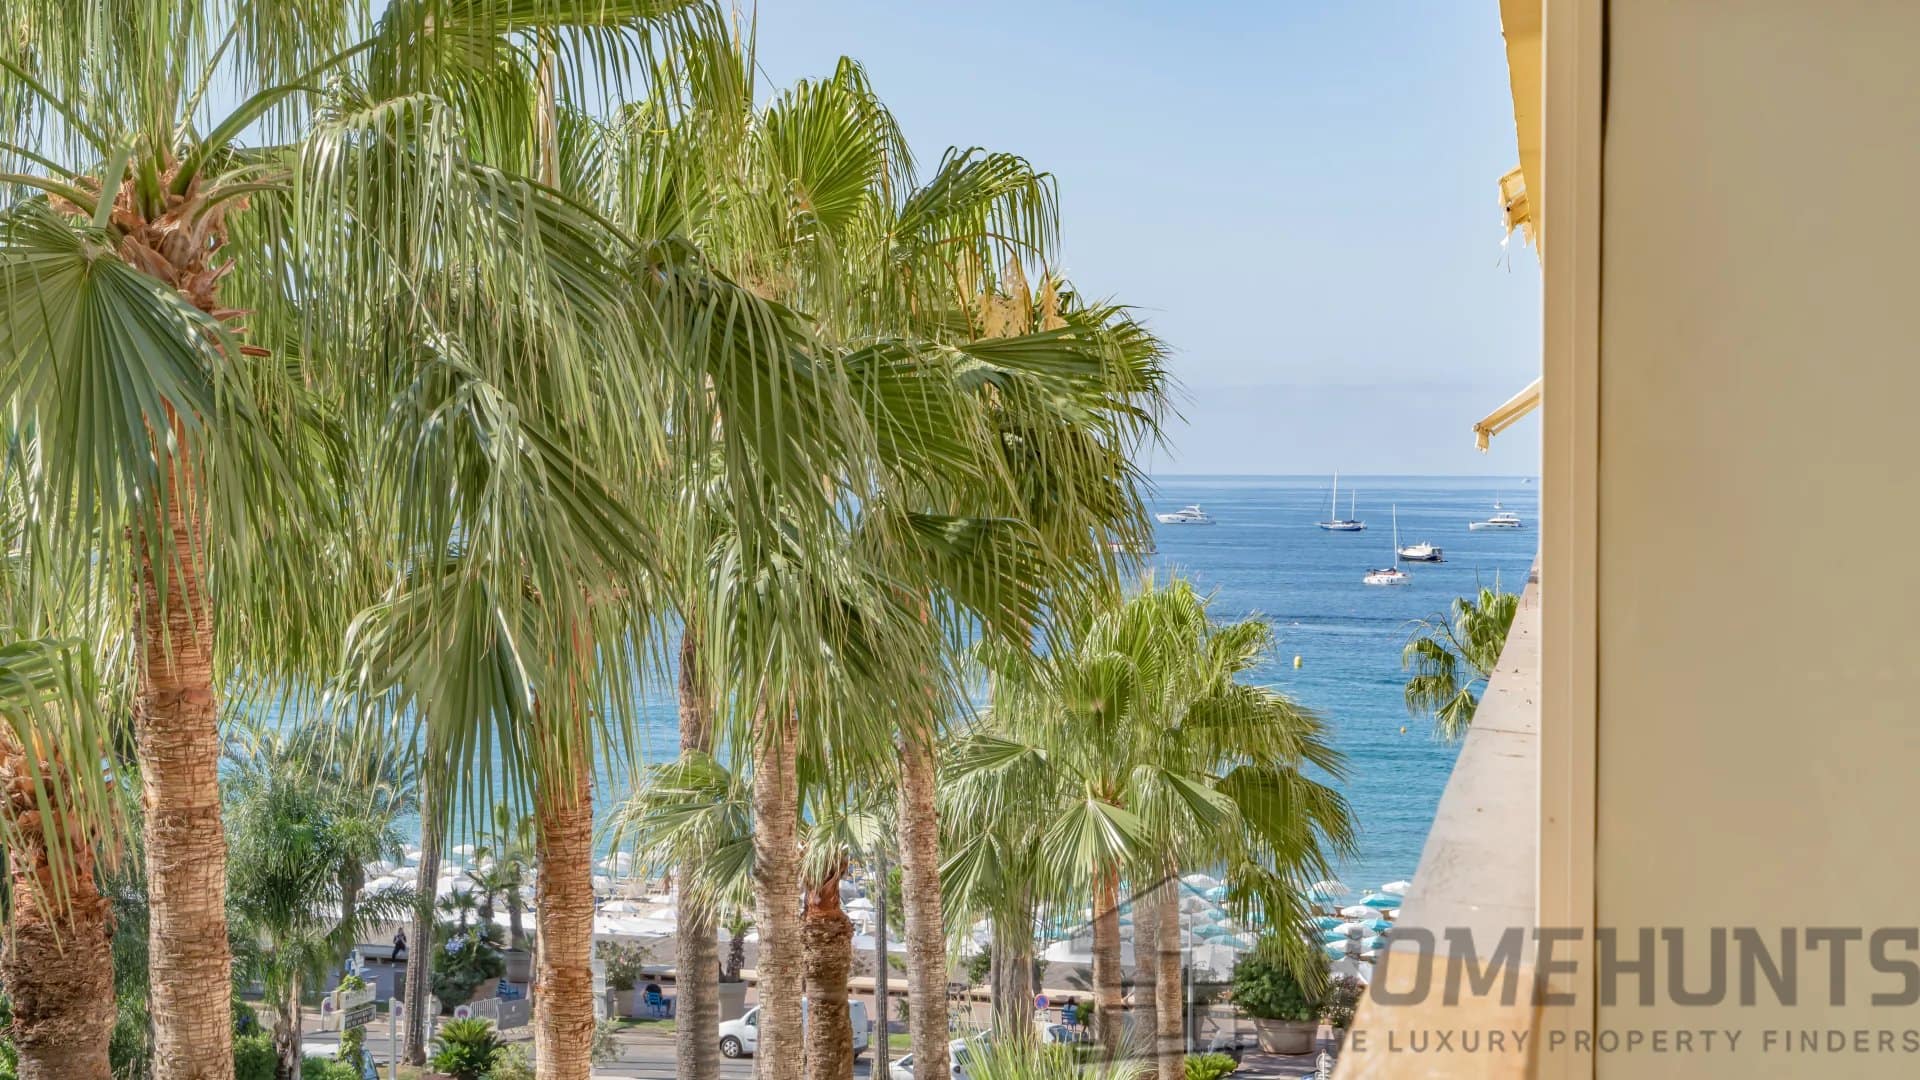 3 Bedroom Apartment in Cannes 24